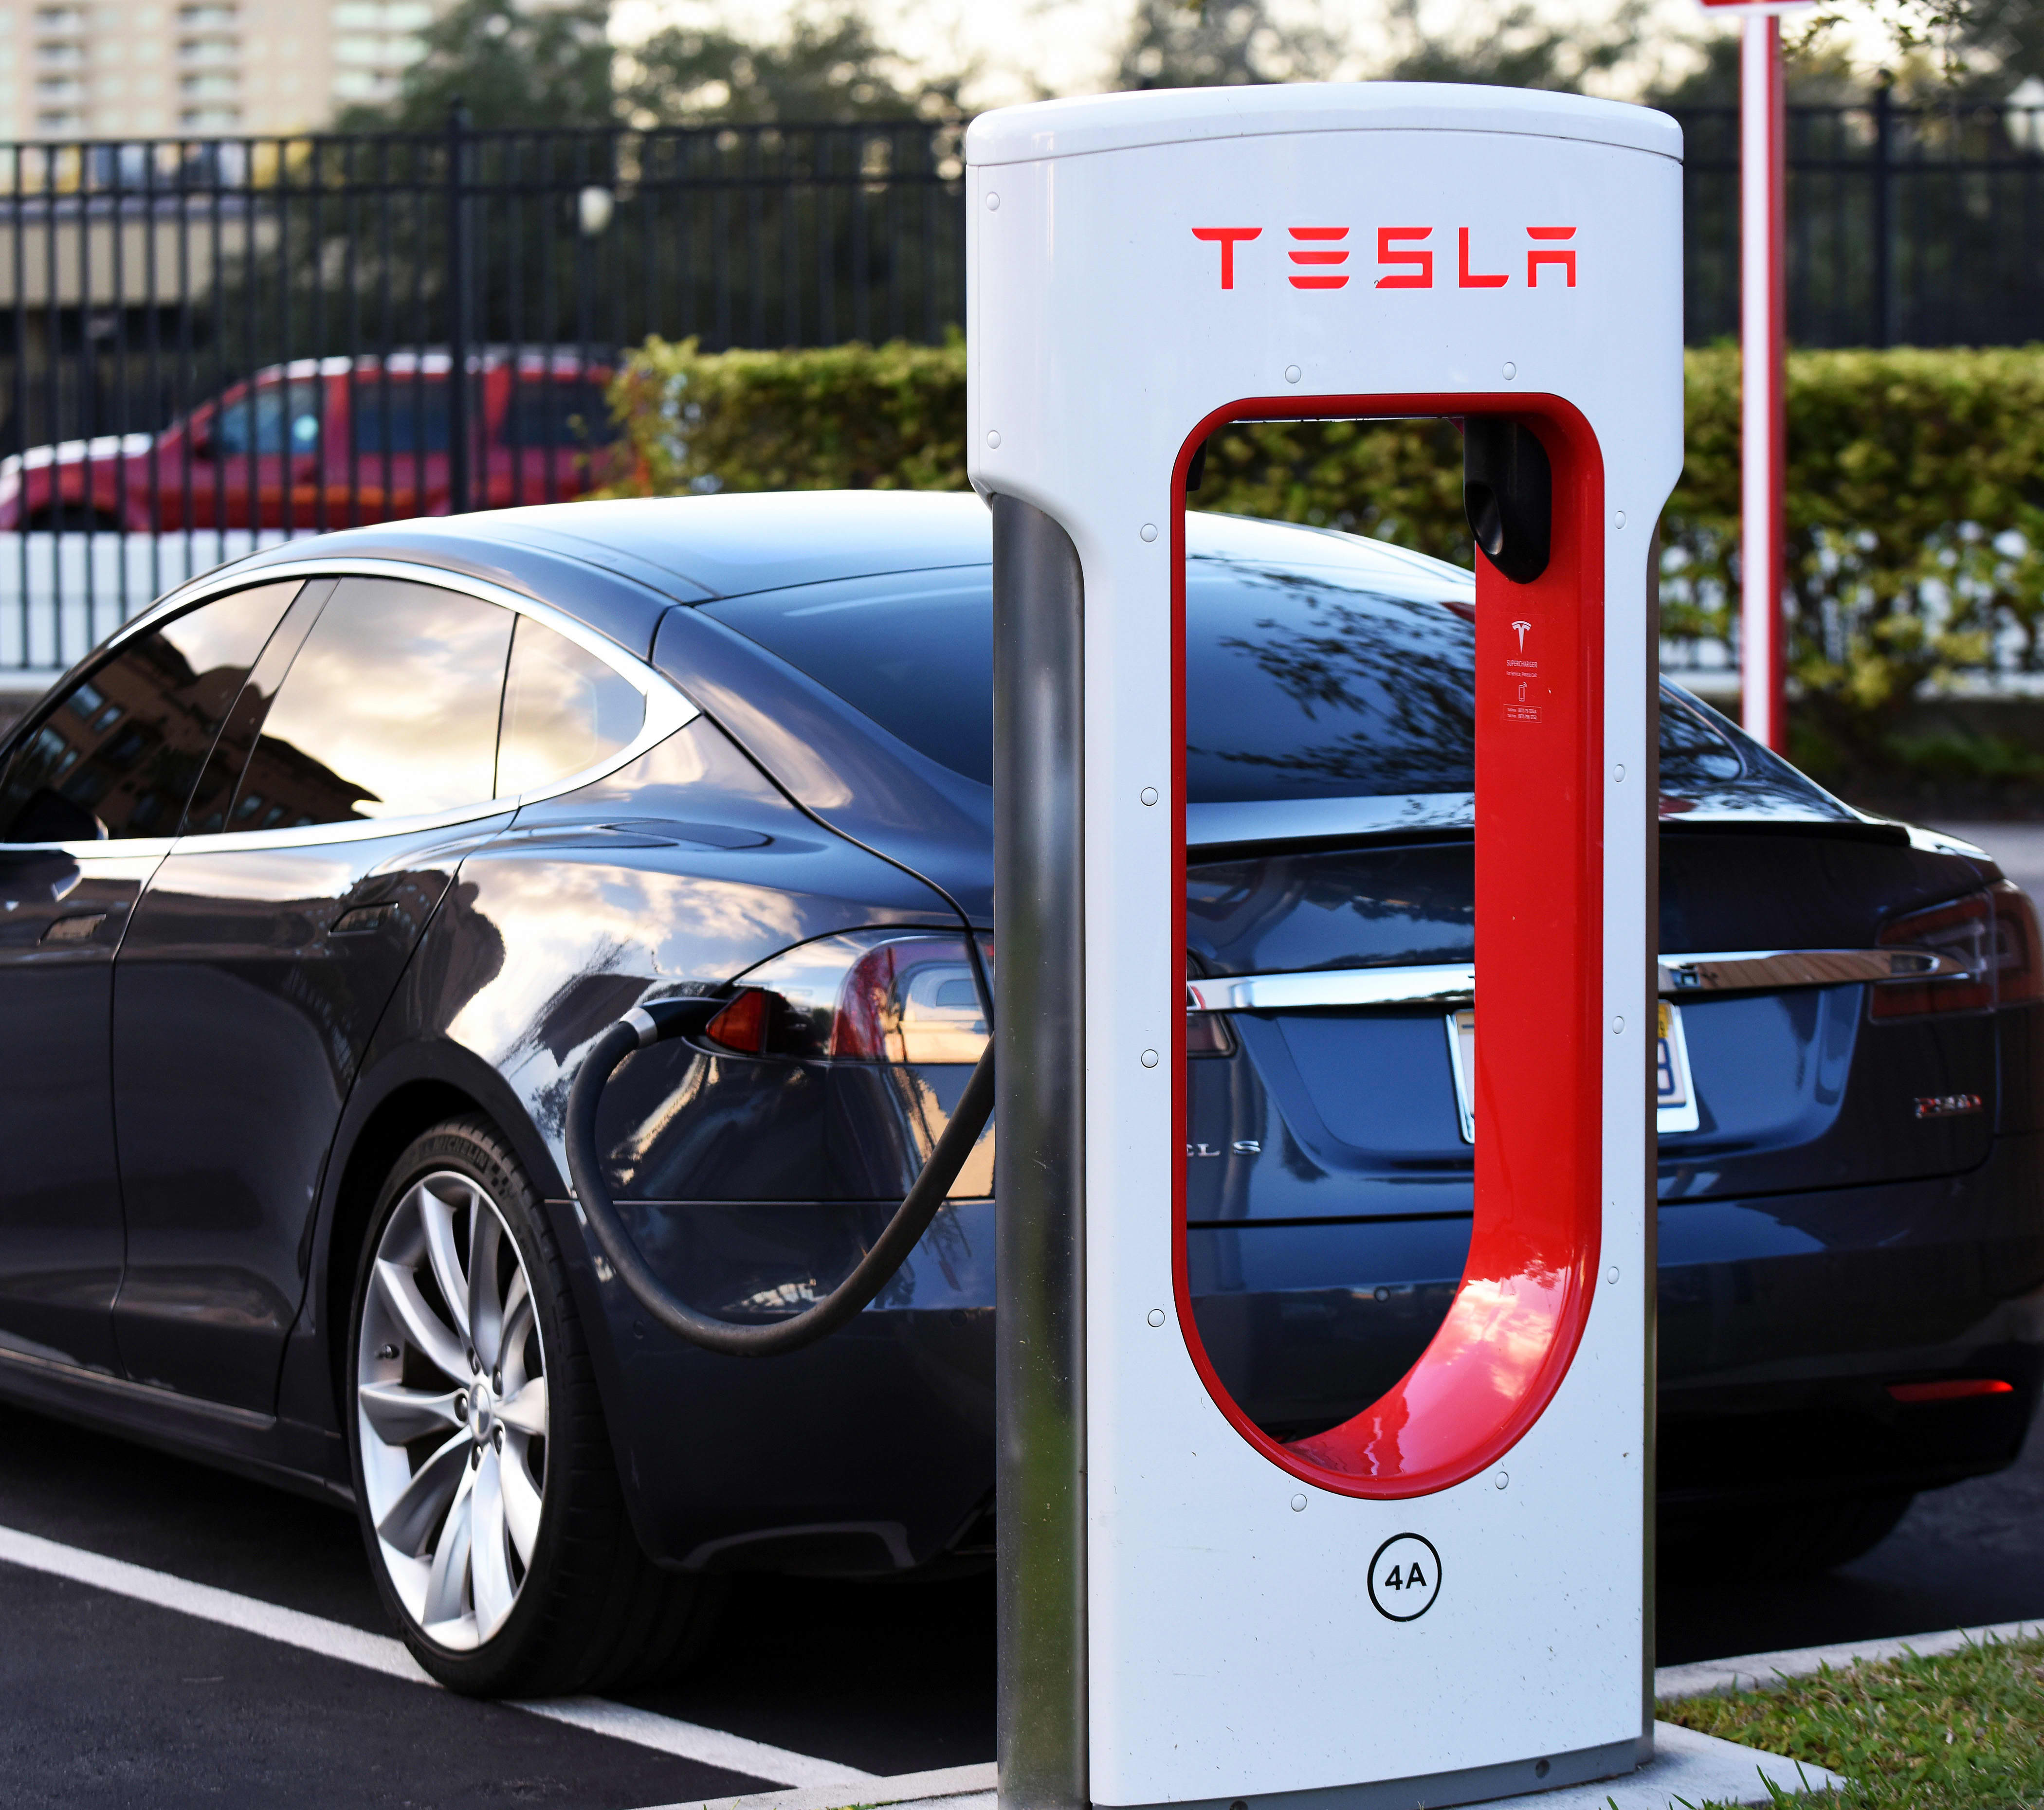 Tesla Supercharger catches fire at a Wawa store in New Jersey - CNBC